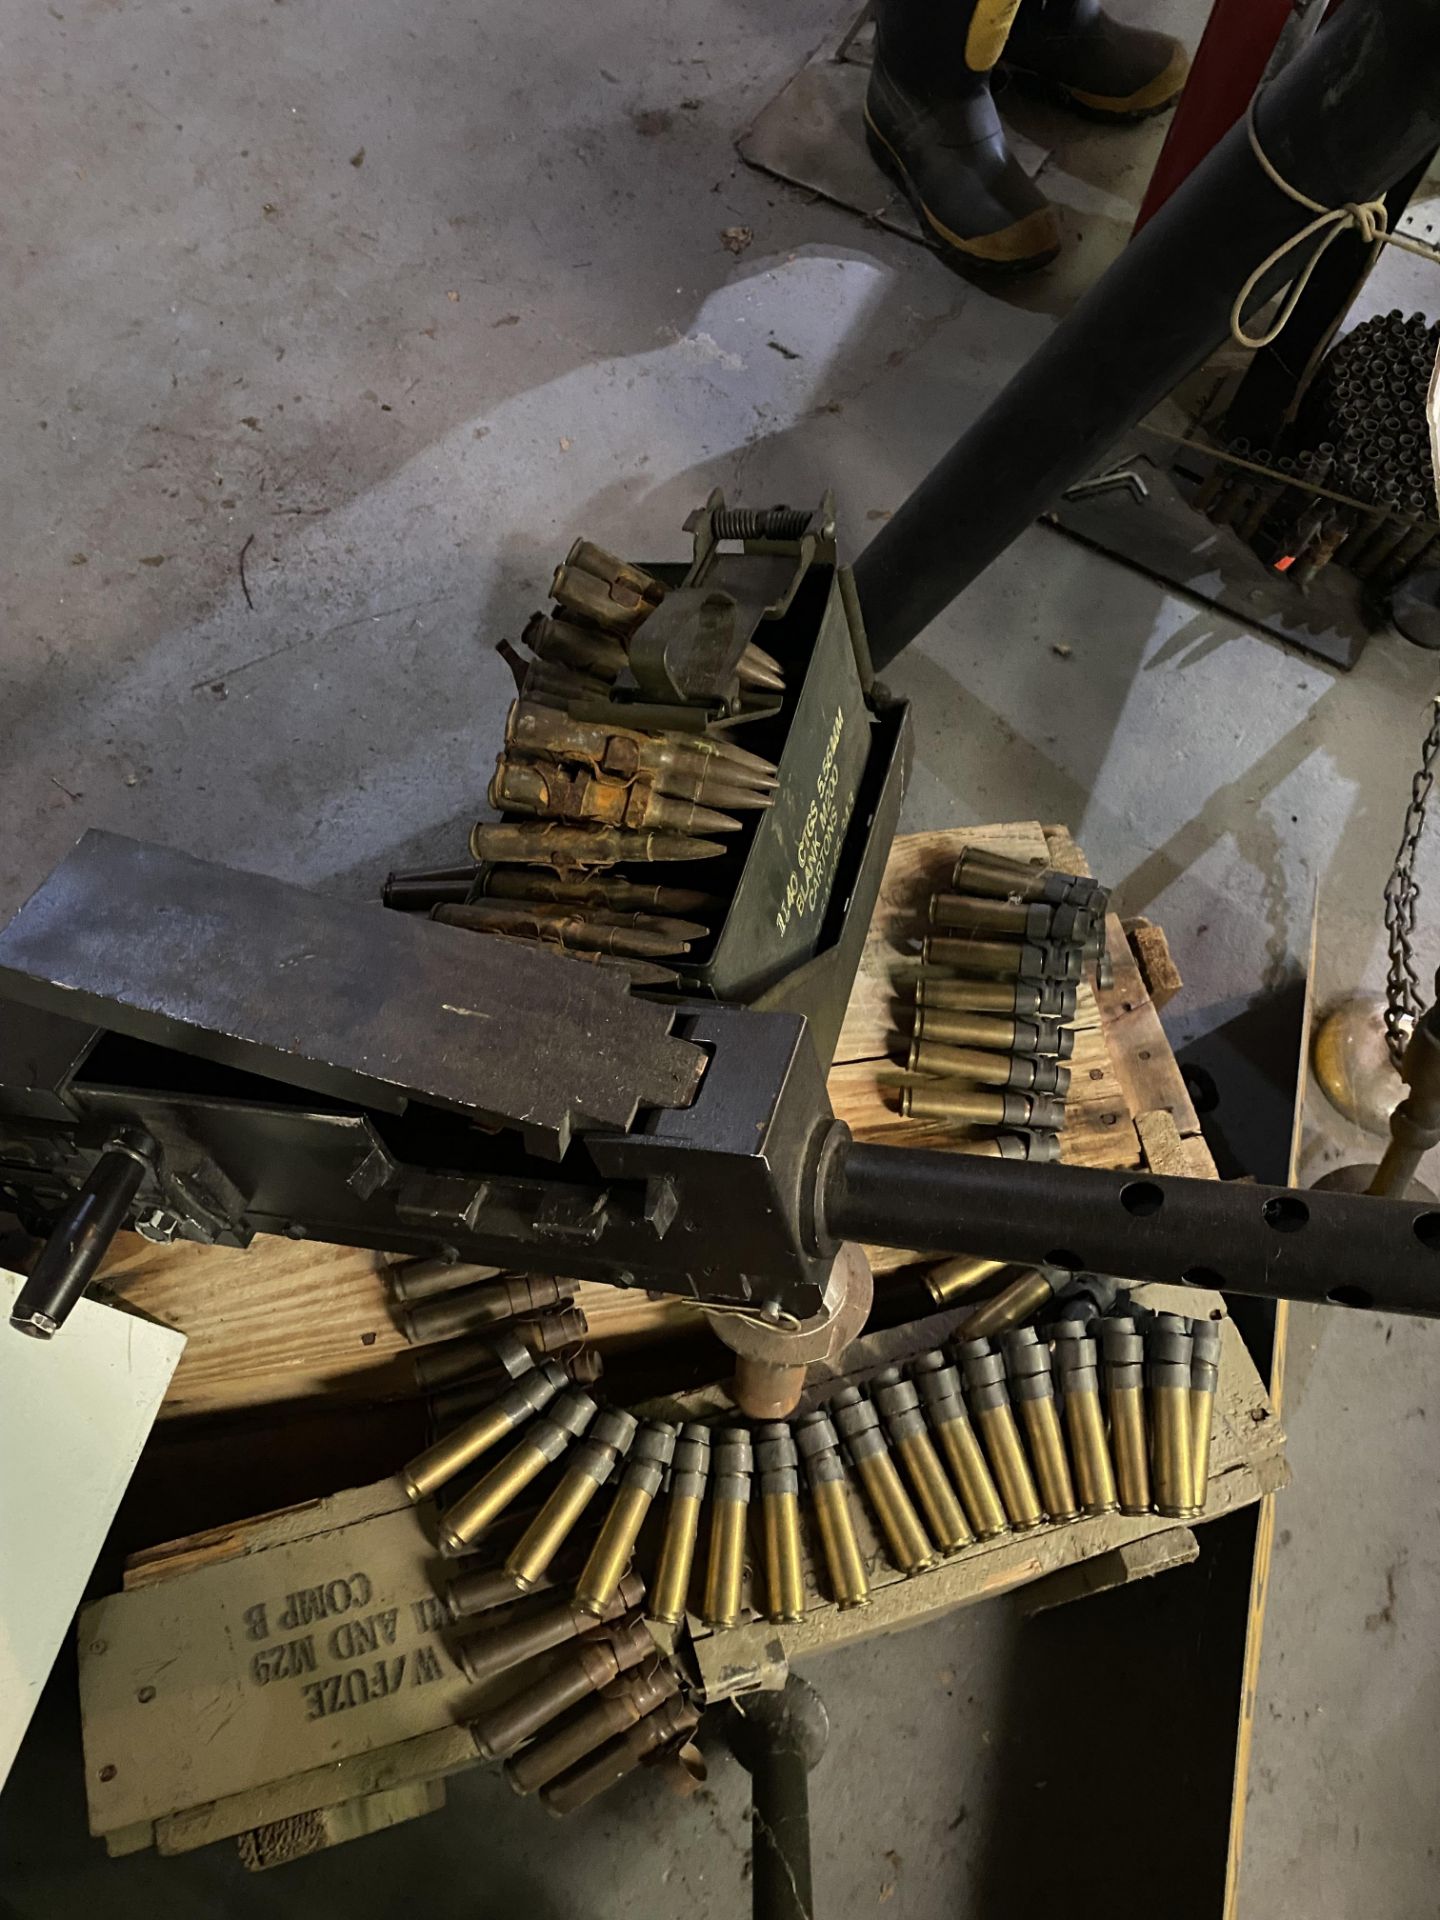 US Military 50 Caliber Display Inert, 58" w/ Ammo Case and Empty Shells and Crates - Image 3 of 3